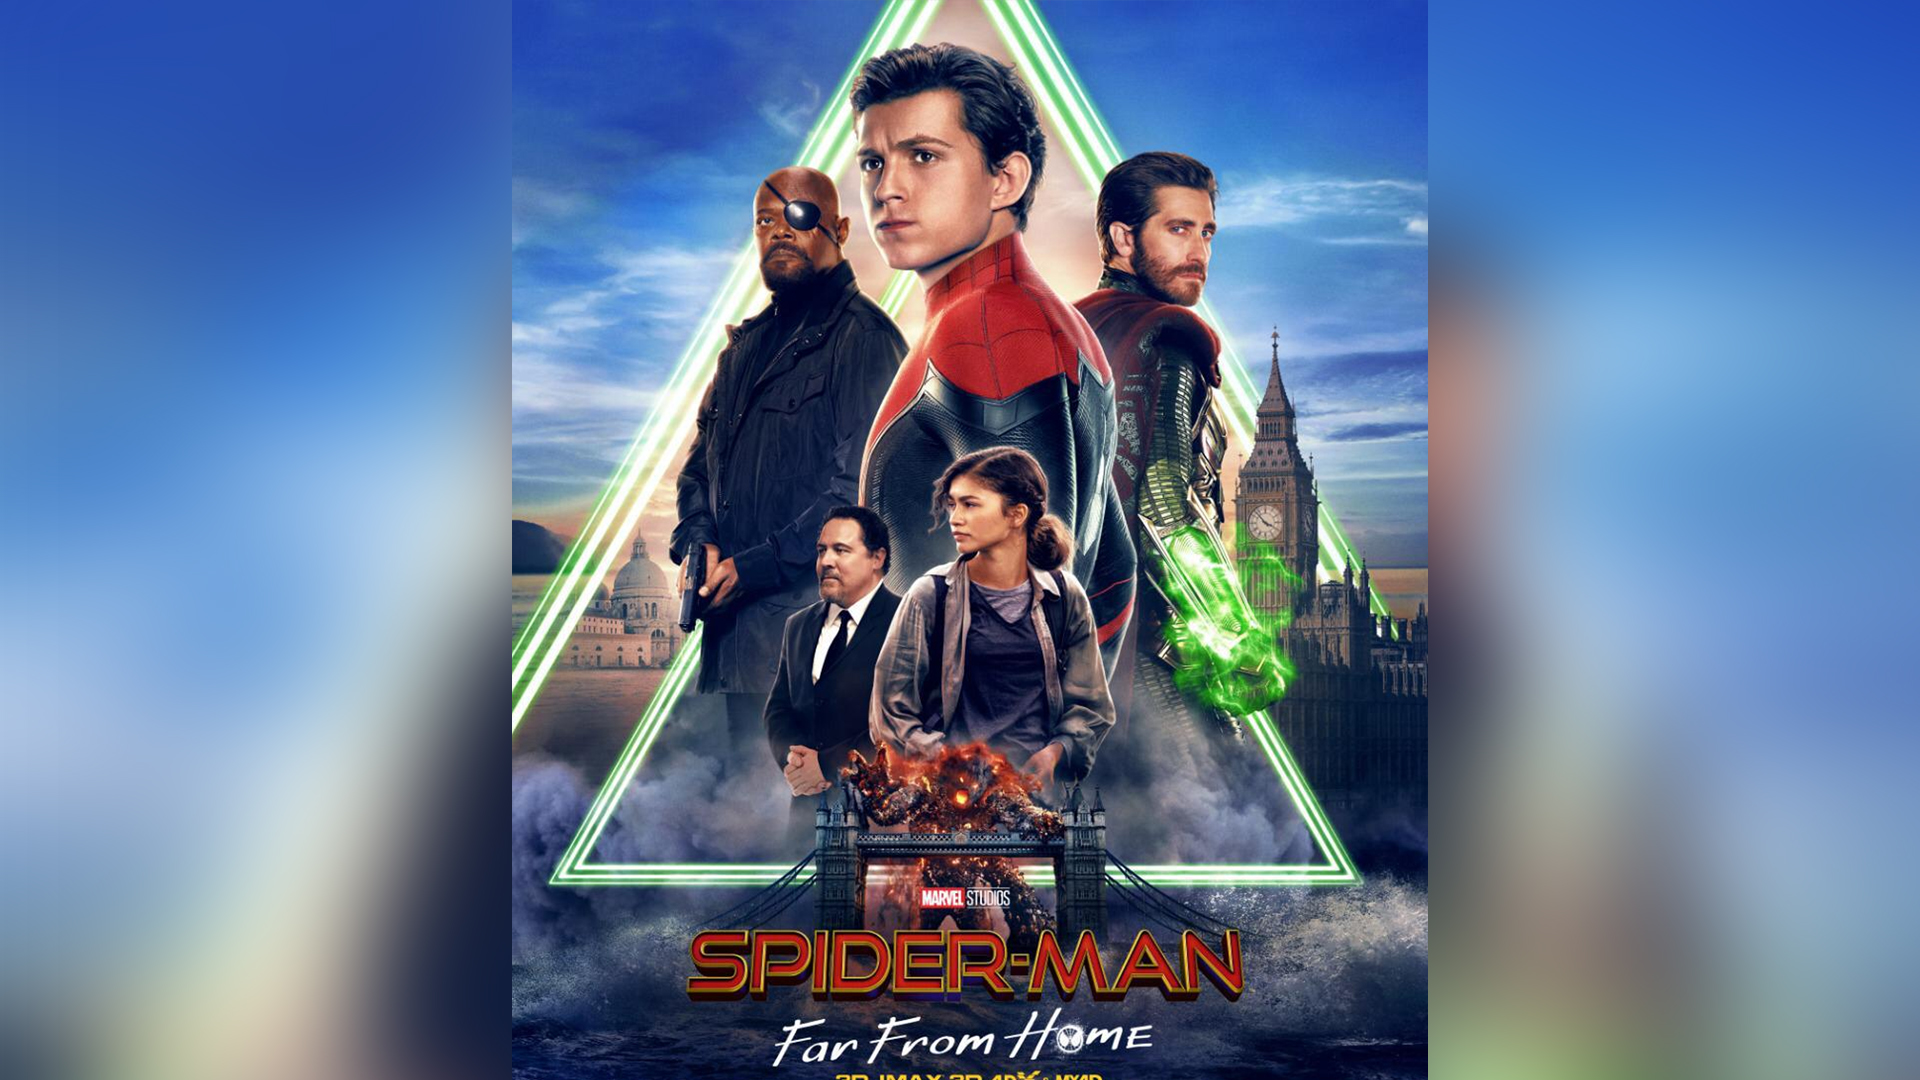 ‘Spider-Man : Far From Home’ to release a day earlier in India due to unprecedented fan demand!